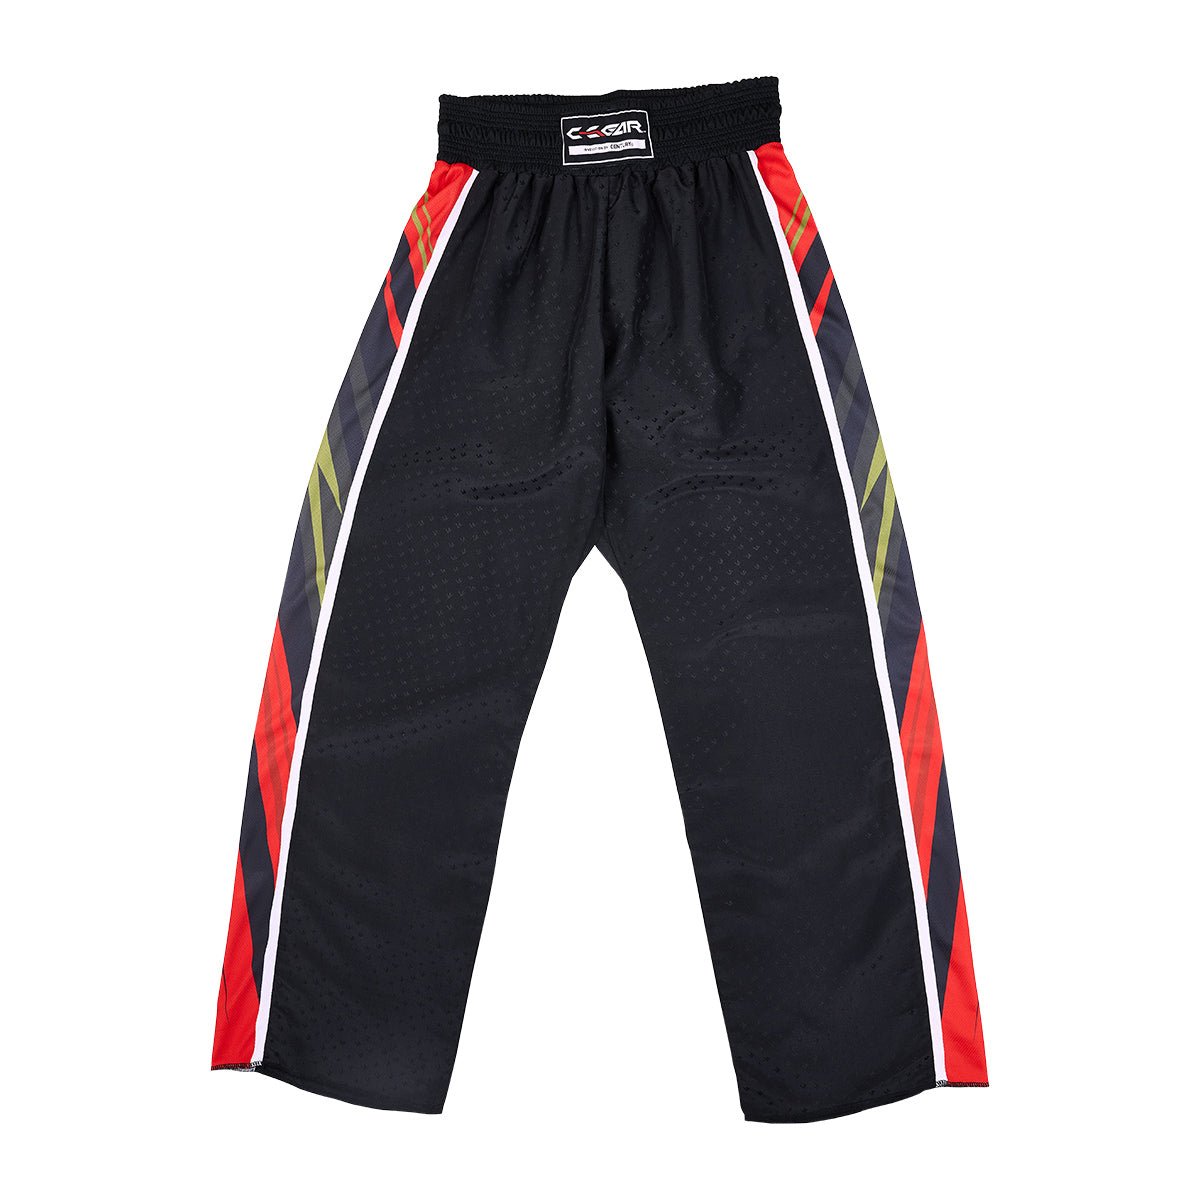 C-Gear Integrity Pant Black/Red